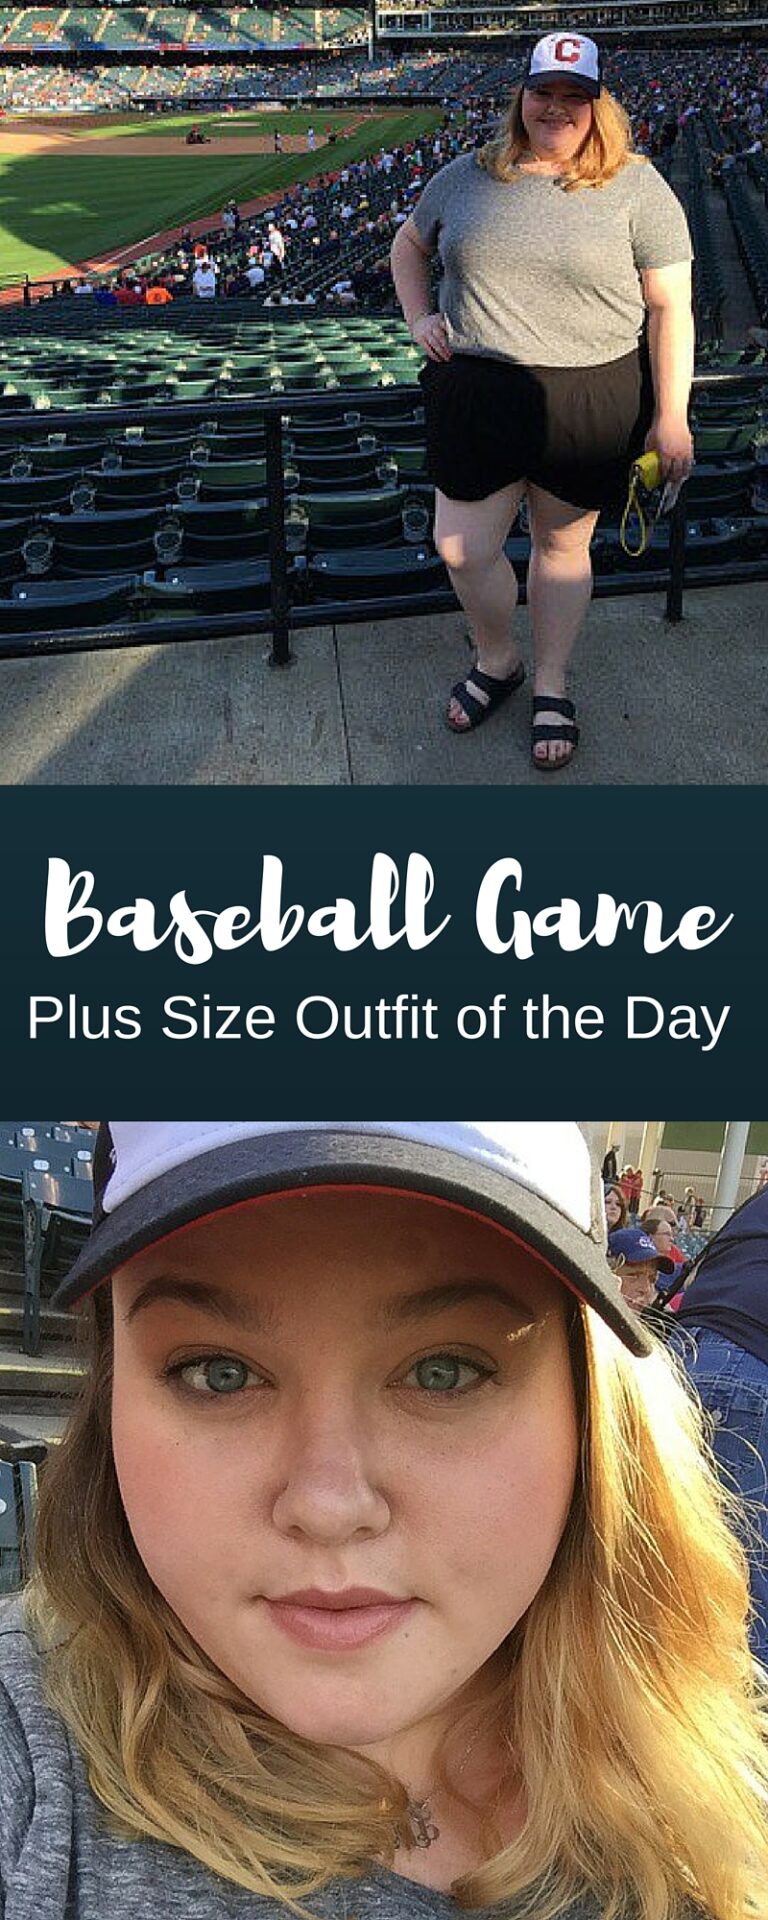 plus size outfits for a baseball game｜TikTok Search